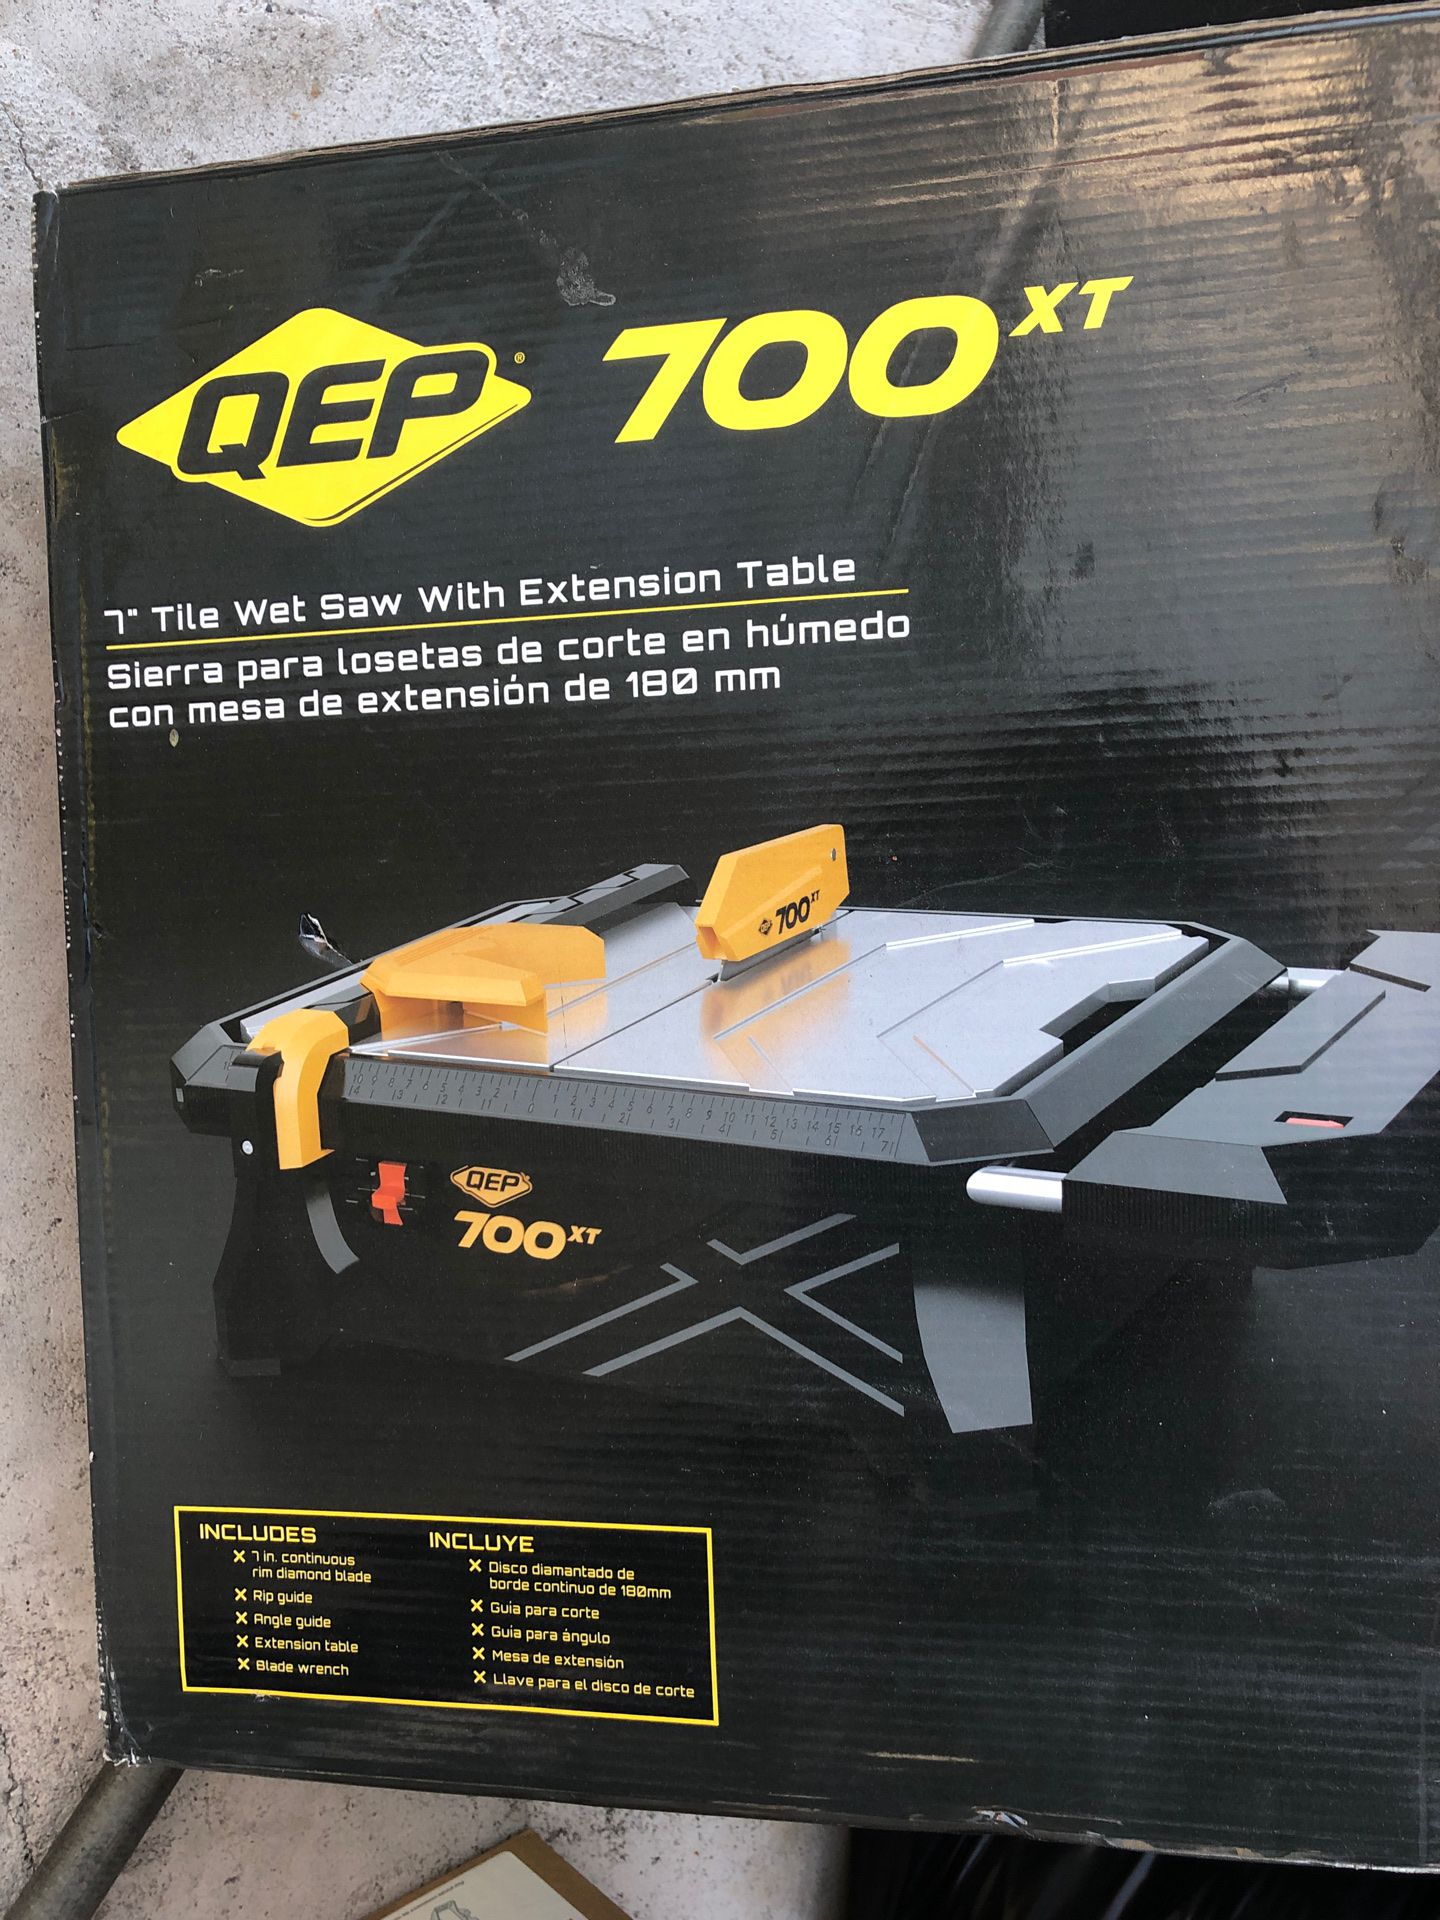 Brand new 7” tile wet saw with extension table